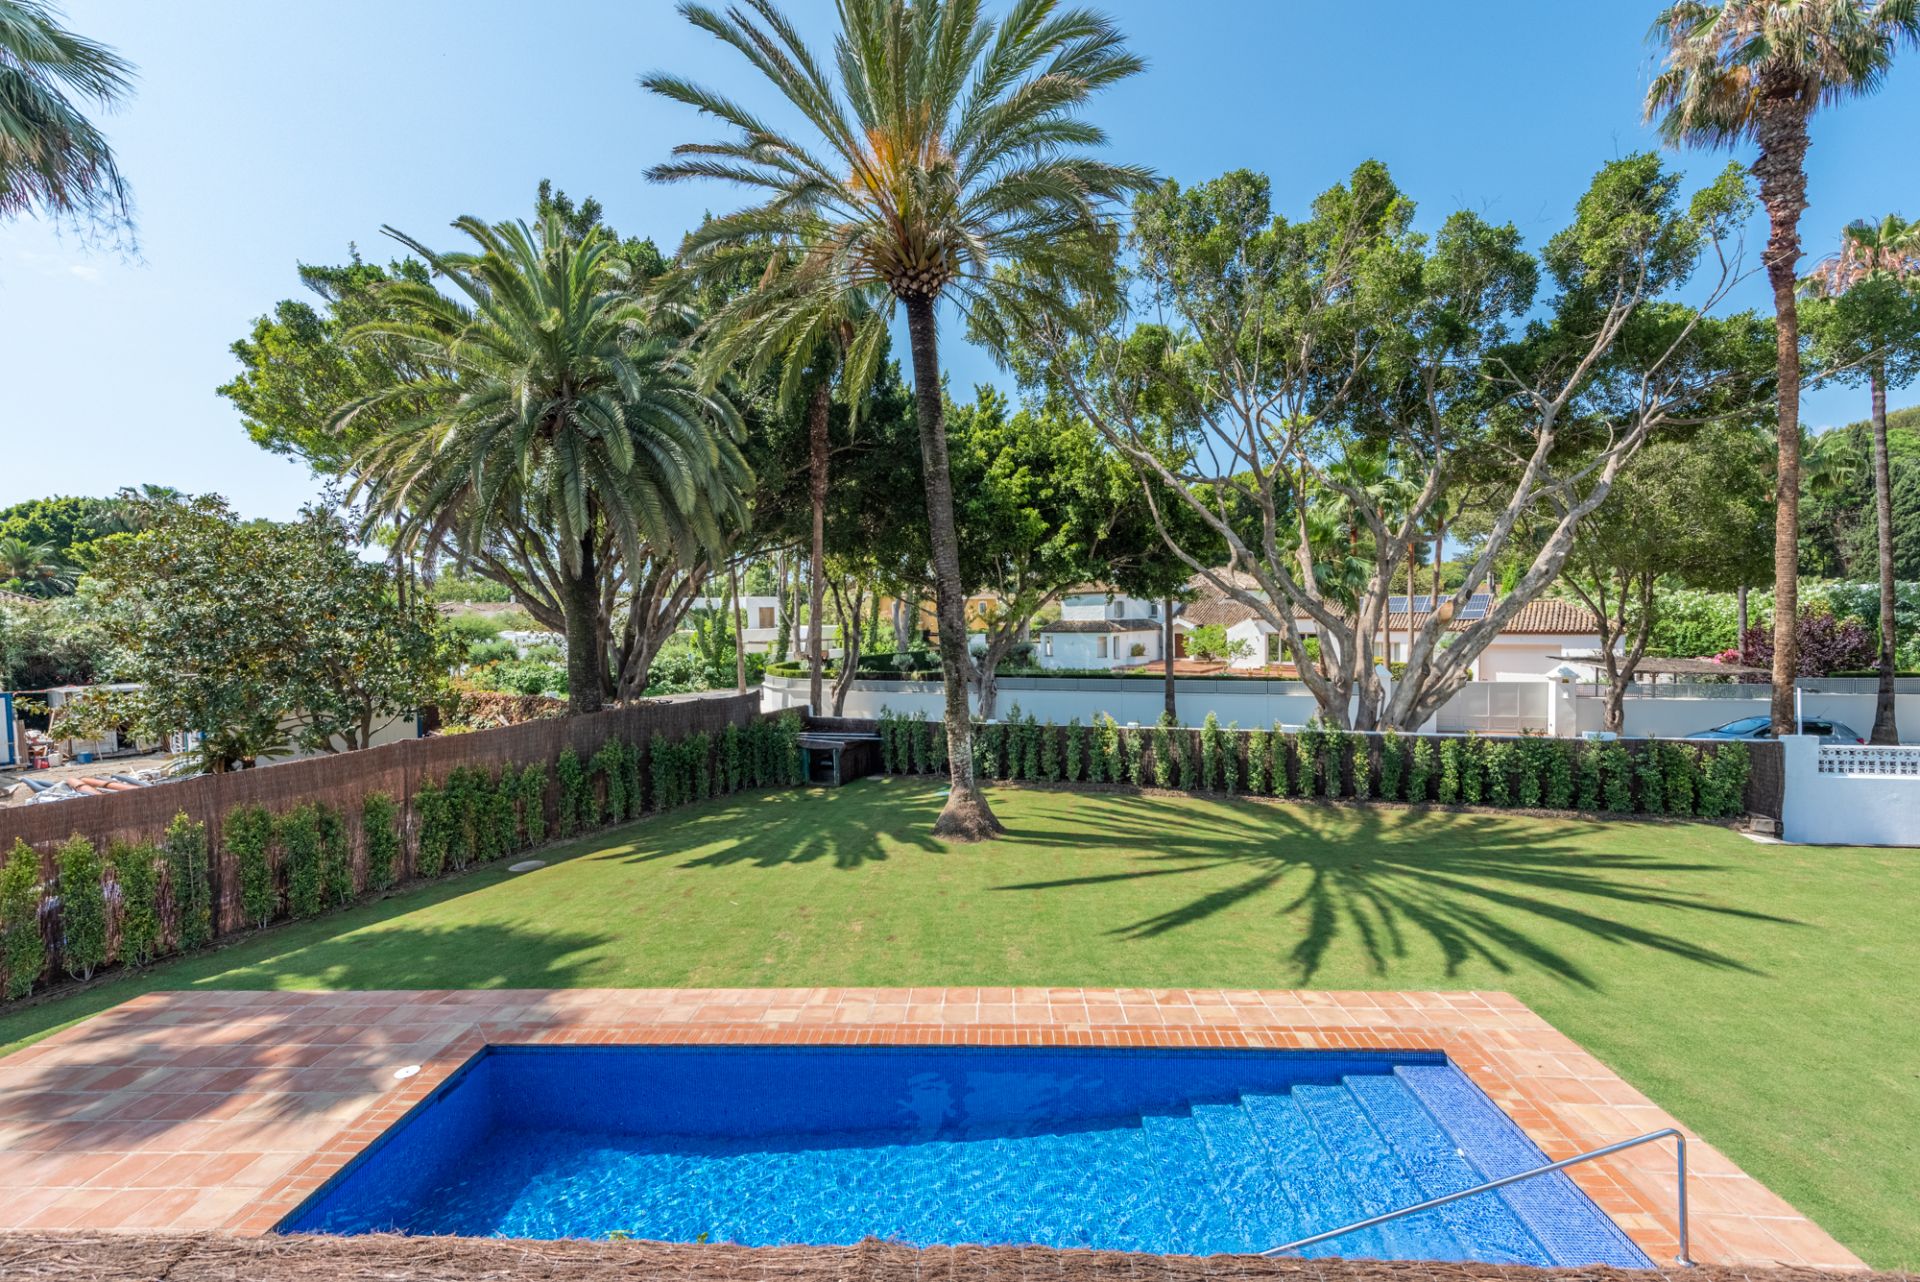 Magnificent fully renovated villa in Reyes y Reinas, one of the most sought-after areas of Sotogrande coast.